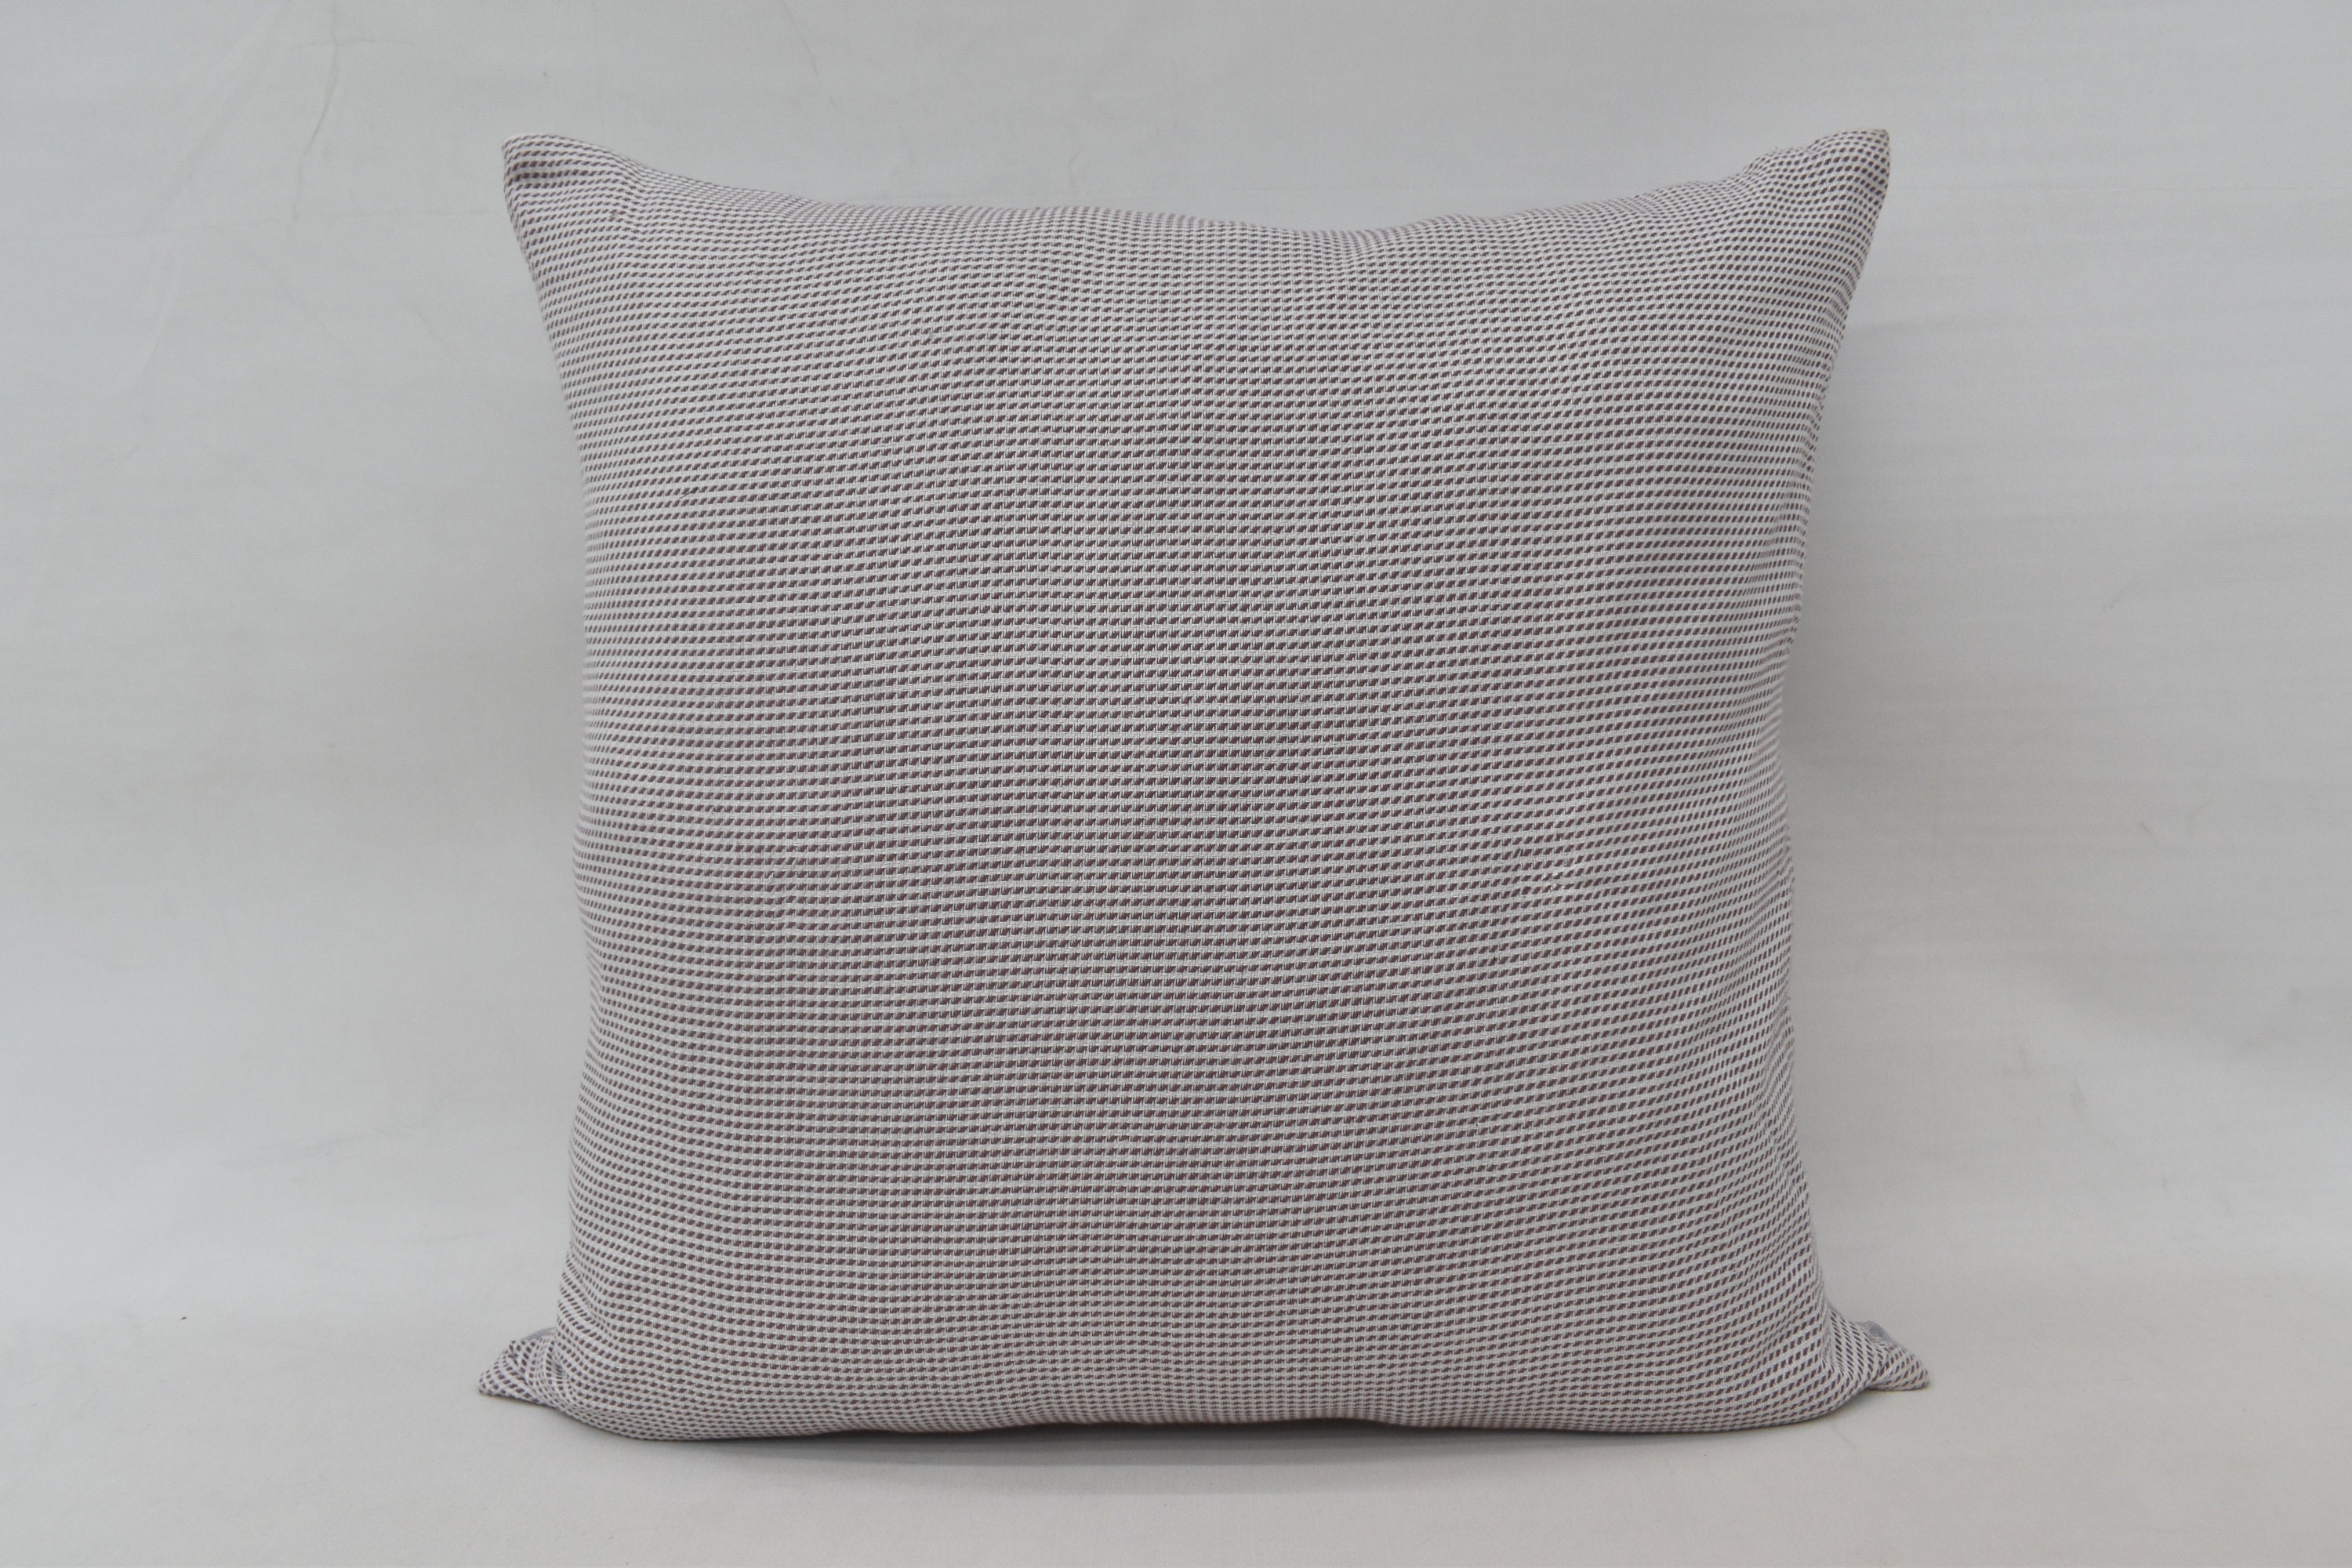 Cushion Covers: Buy Cushion Cover Online @Upto 70% OFF